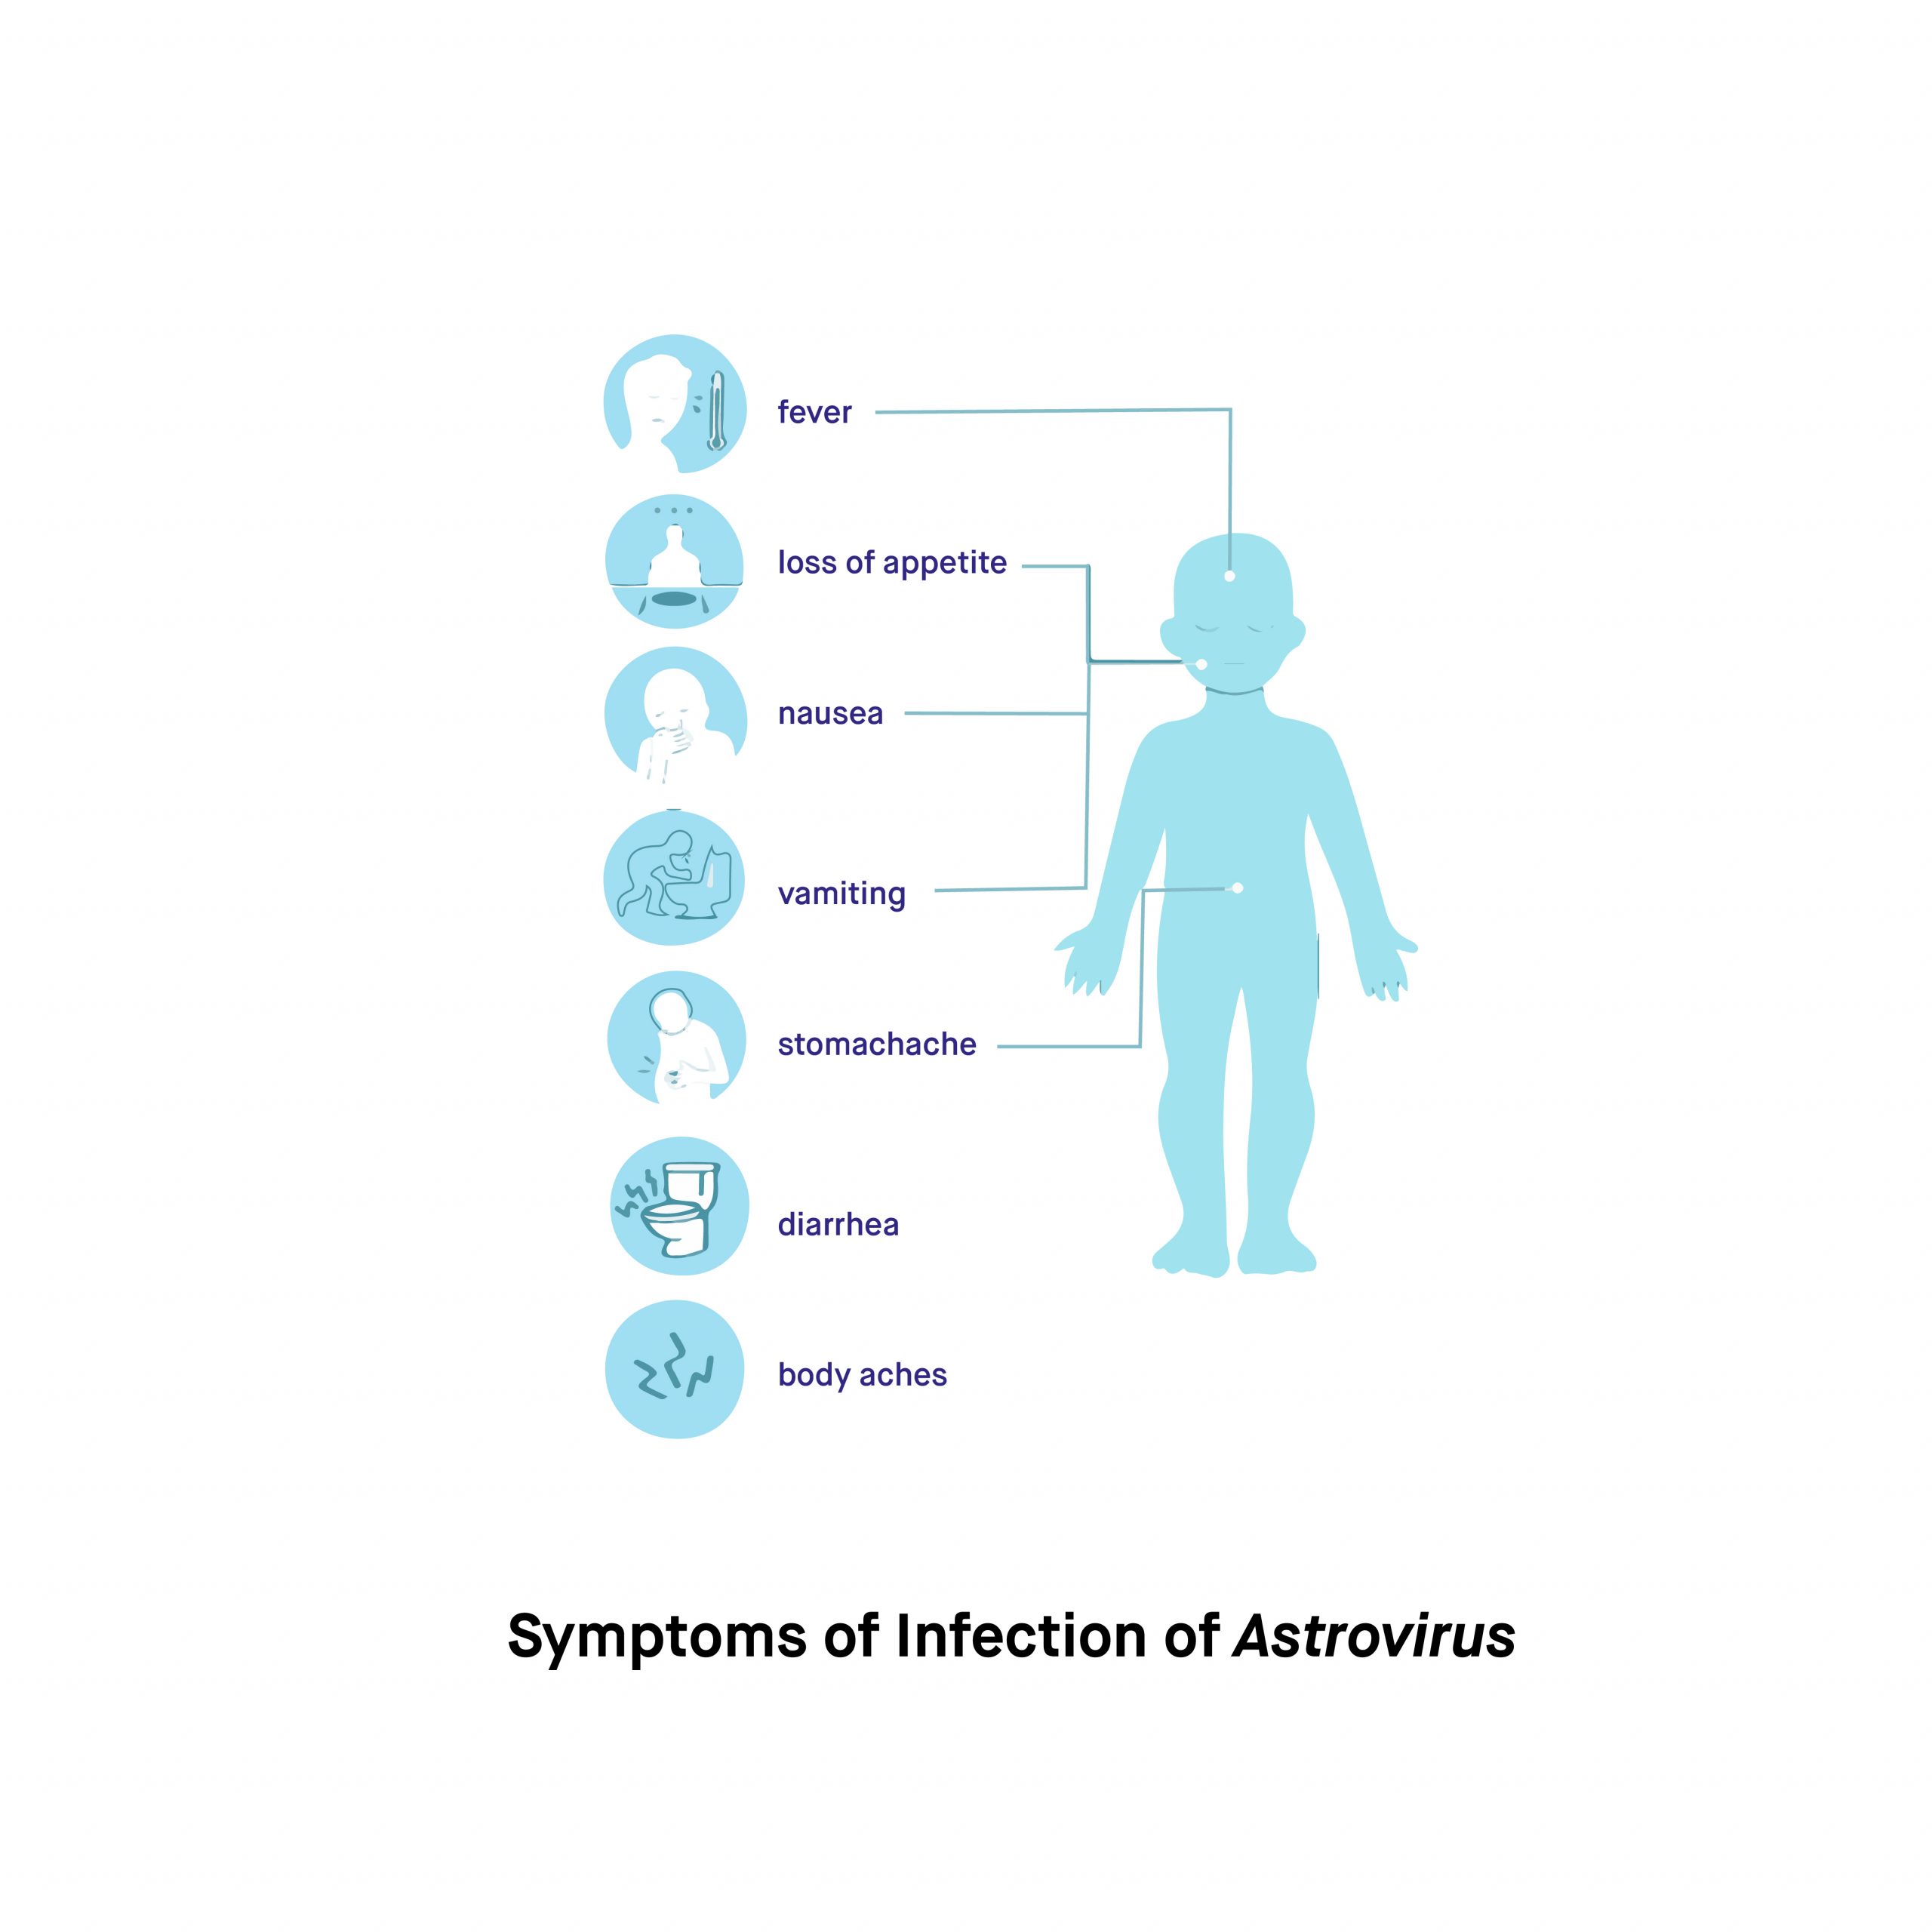 What are the signs and symptoms of Astrovirus infections scaled